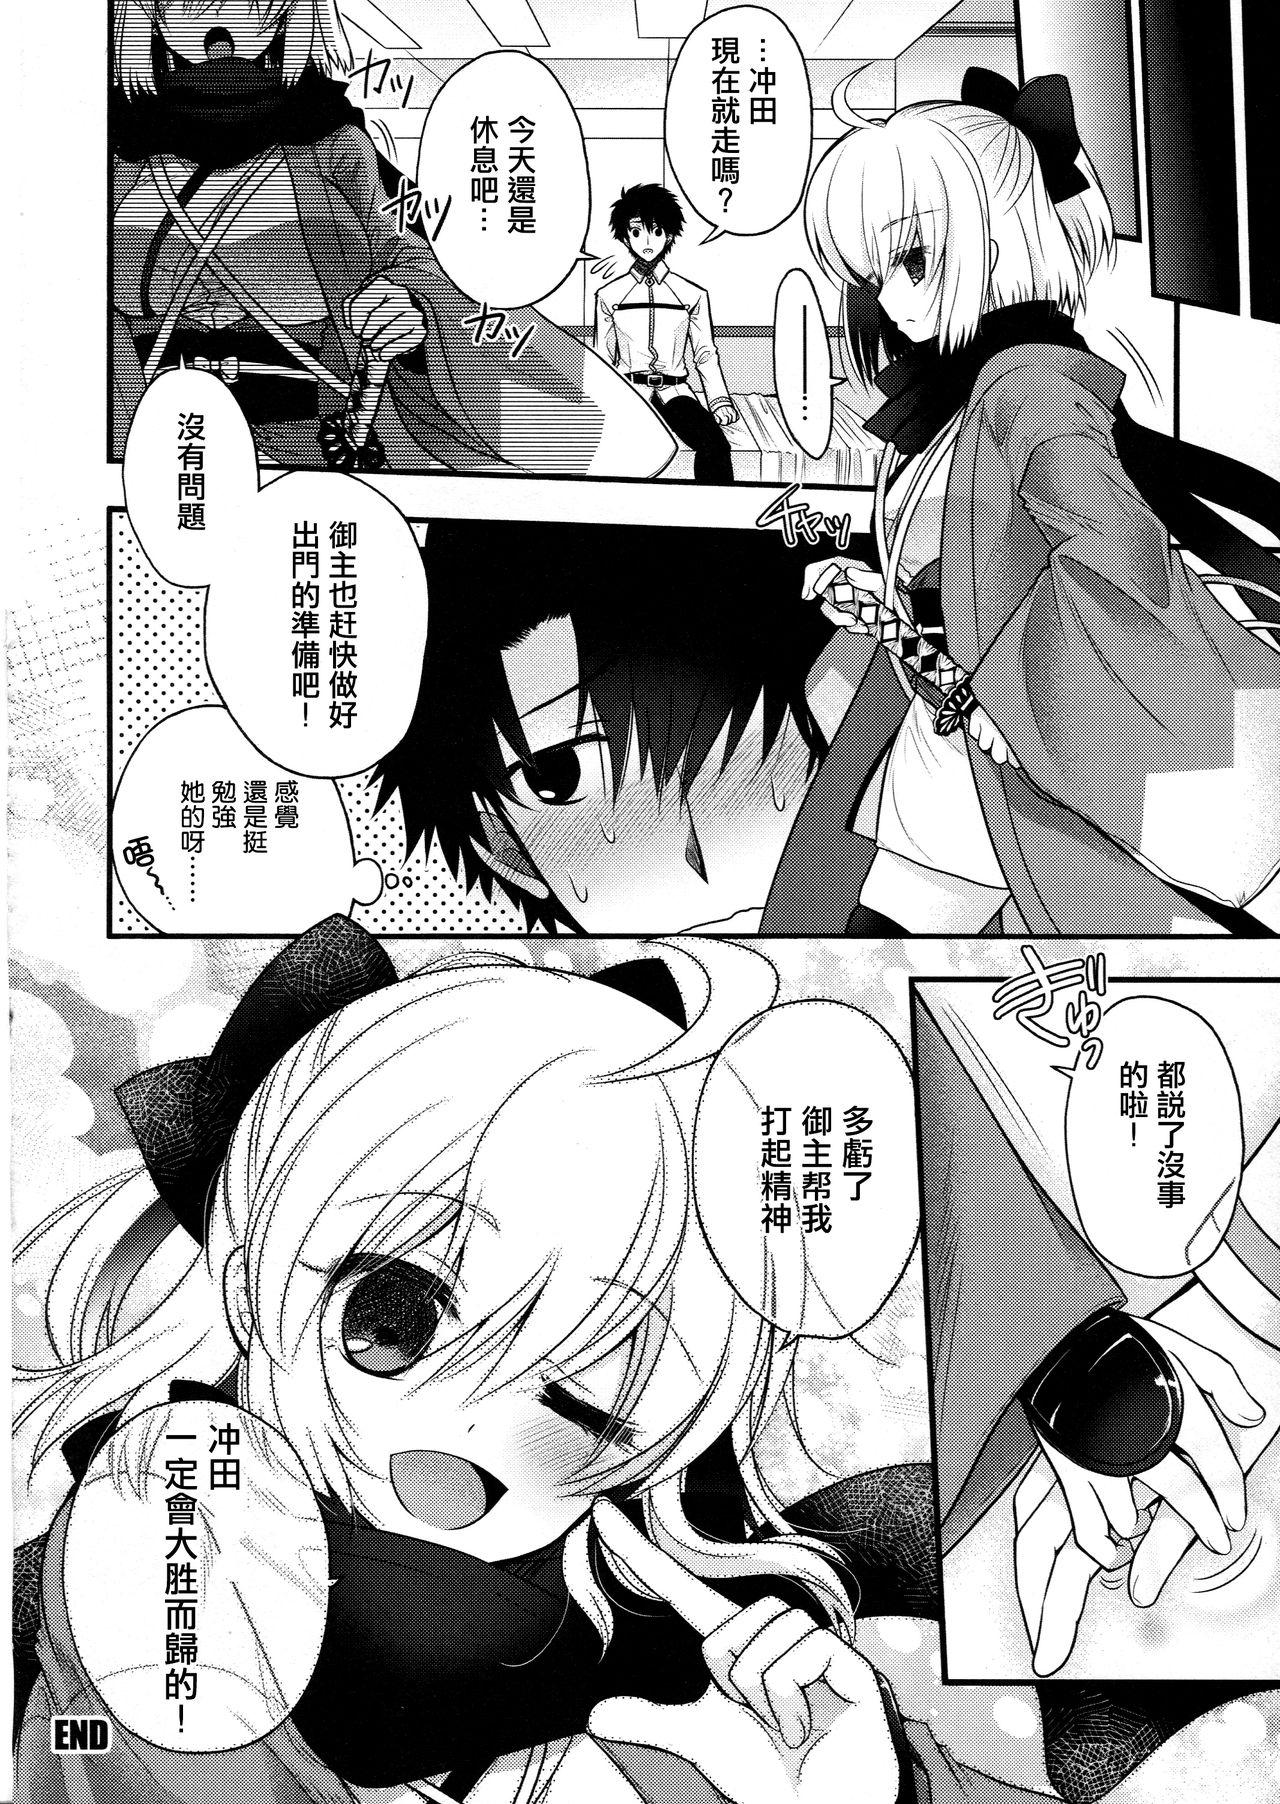 Best Blowjobs Ever My Room My Love - Fate grand order India - Page 12